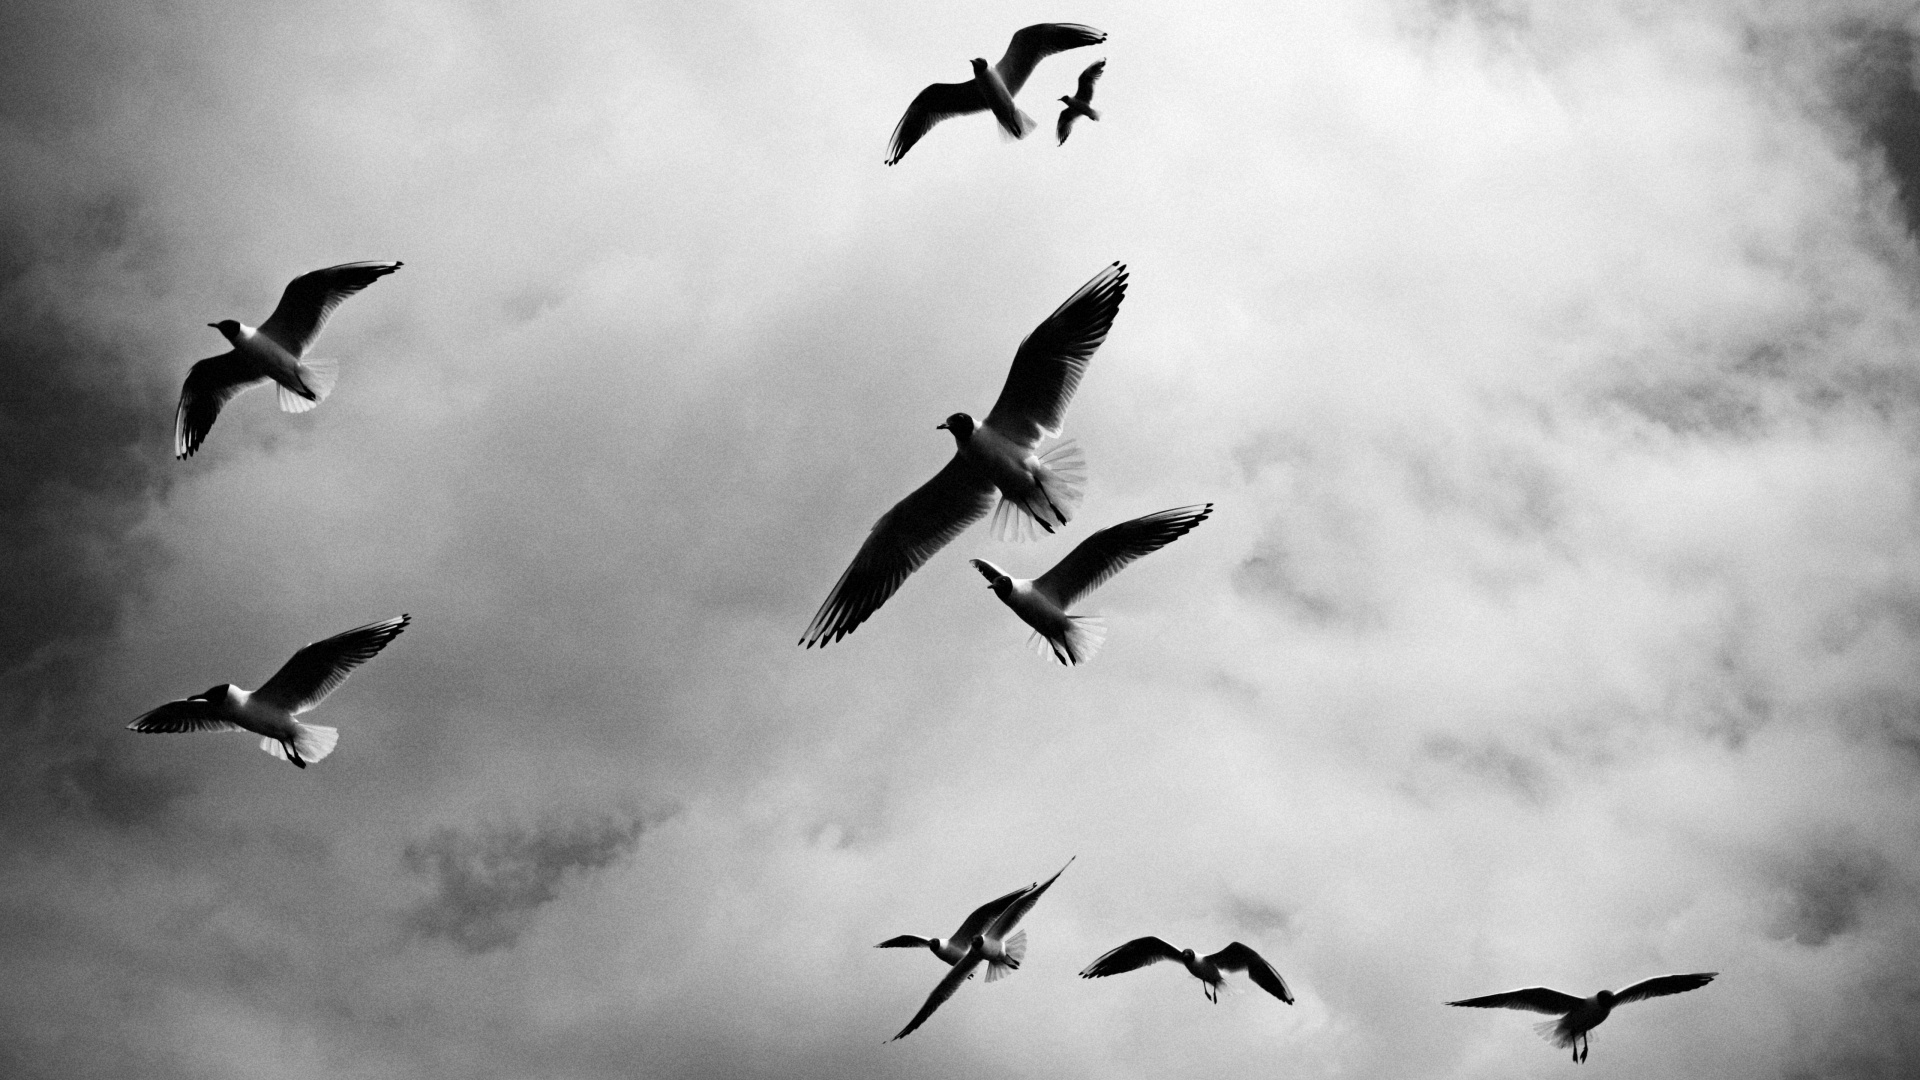 Grayscale Photography of Birds Flying. Wallpaper in 1920x1080 Resolution